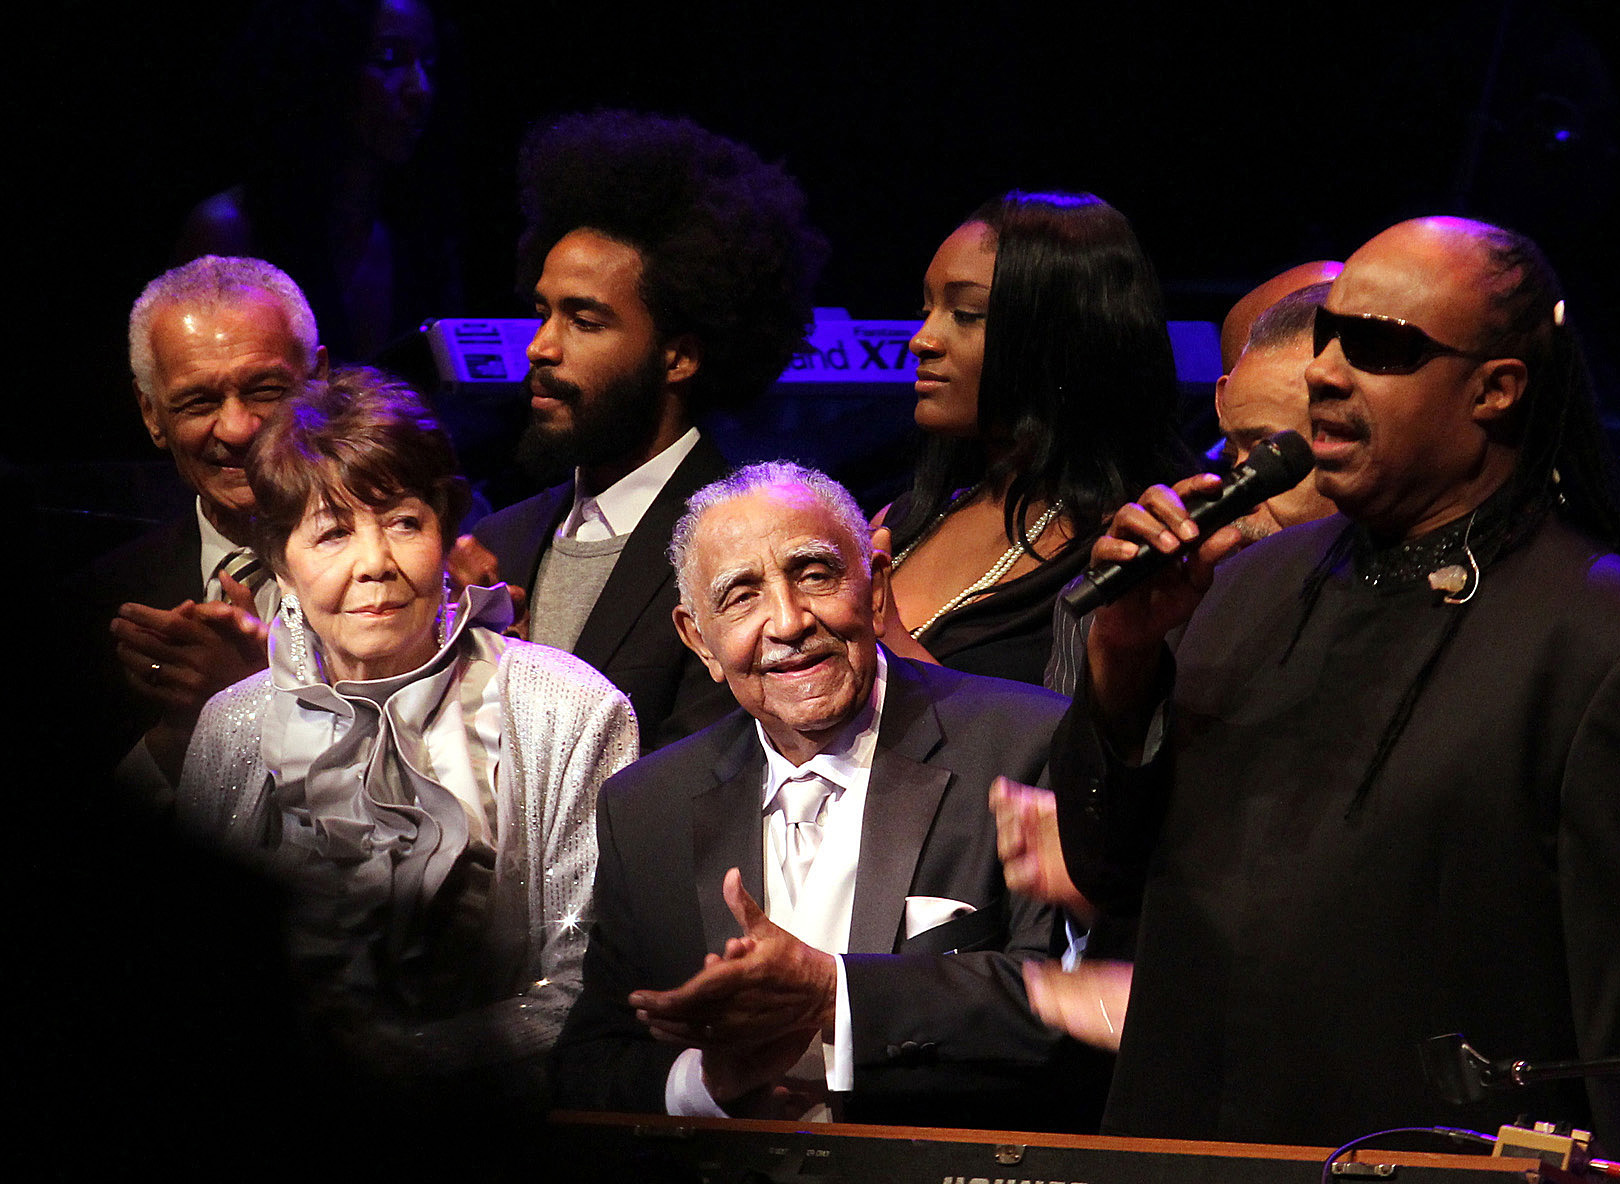 Rev. Dr. Joseph E. Lowery's Ninety Years Birthday Celebration at the Atlanta Symphony Hall, October 9, 2011 included a birthday song by Stevie Wonder.  Next to Rev. Lowery is his wife of 60 years, Evelyn Lowery. Photo by Kathleen Barry, United Methodist Communications.